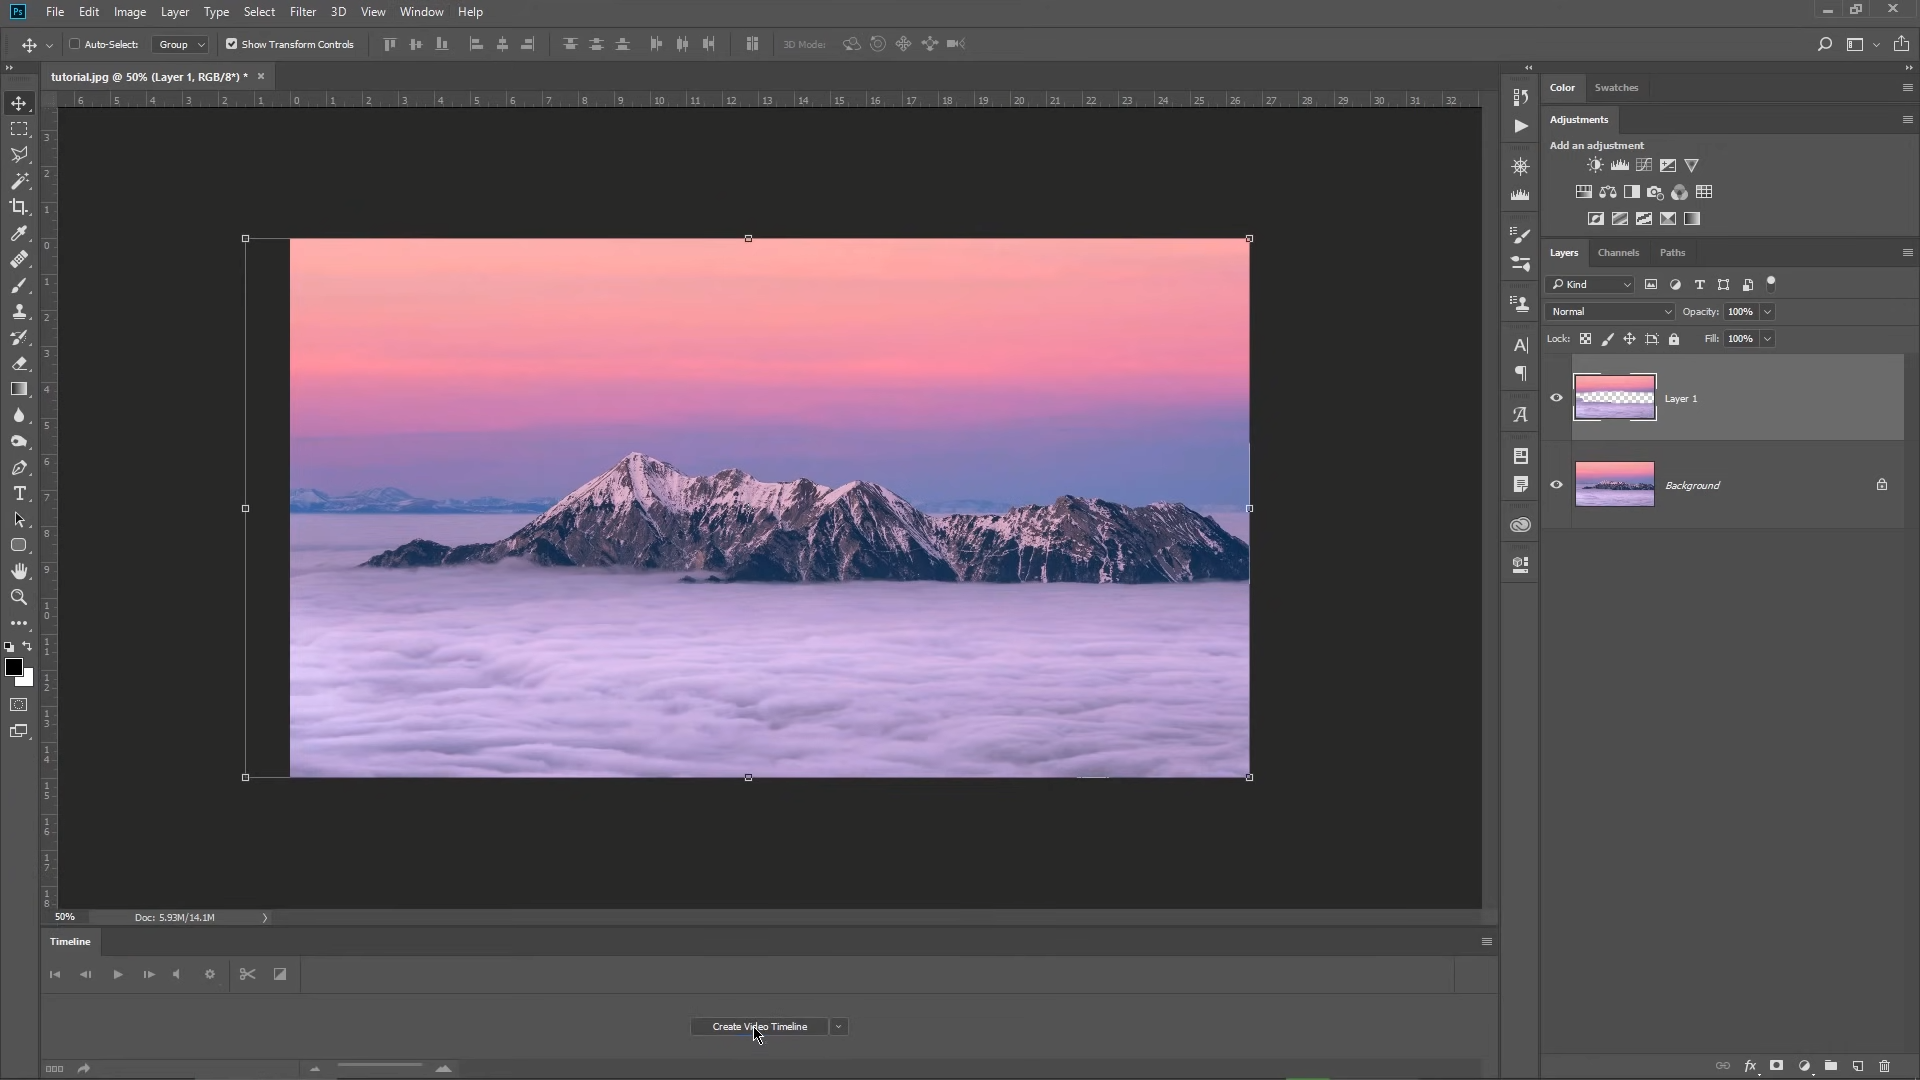 Creating Video Timeline In Adobe Photoshop